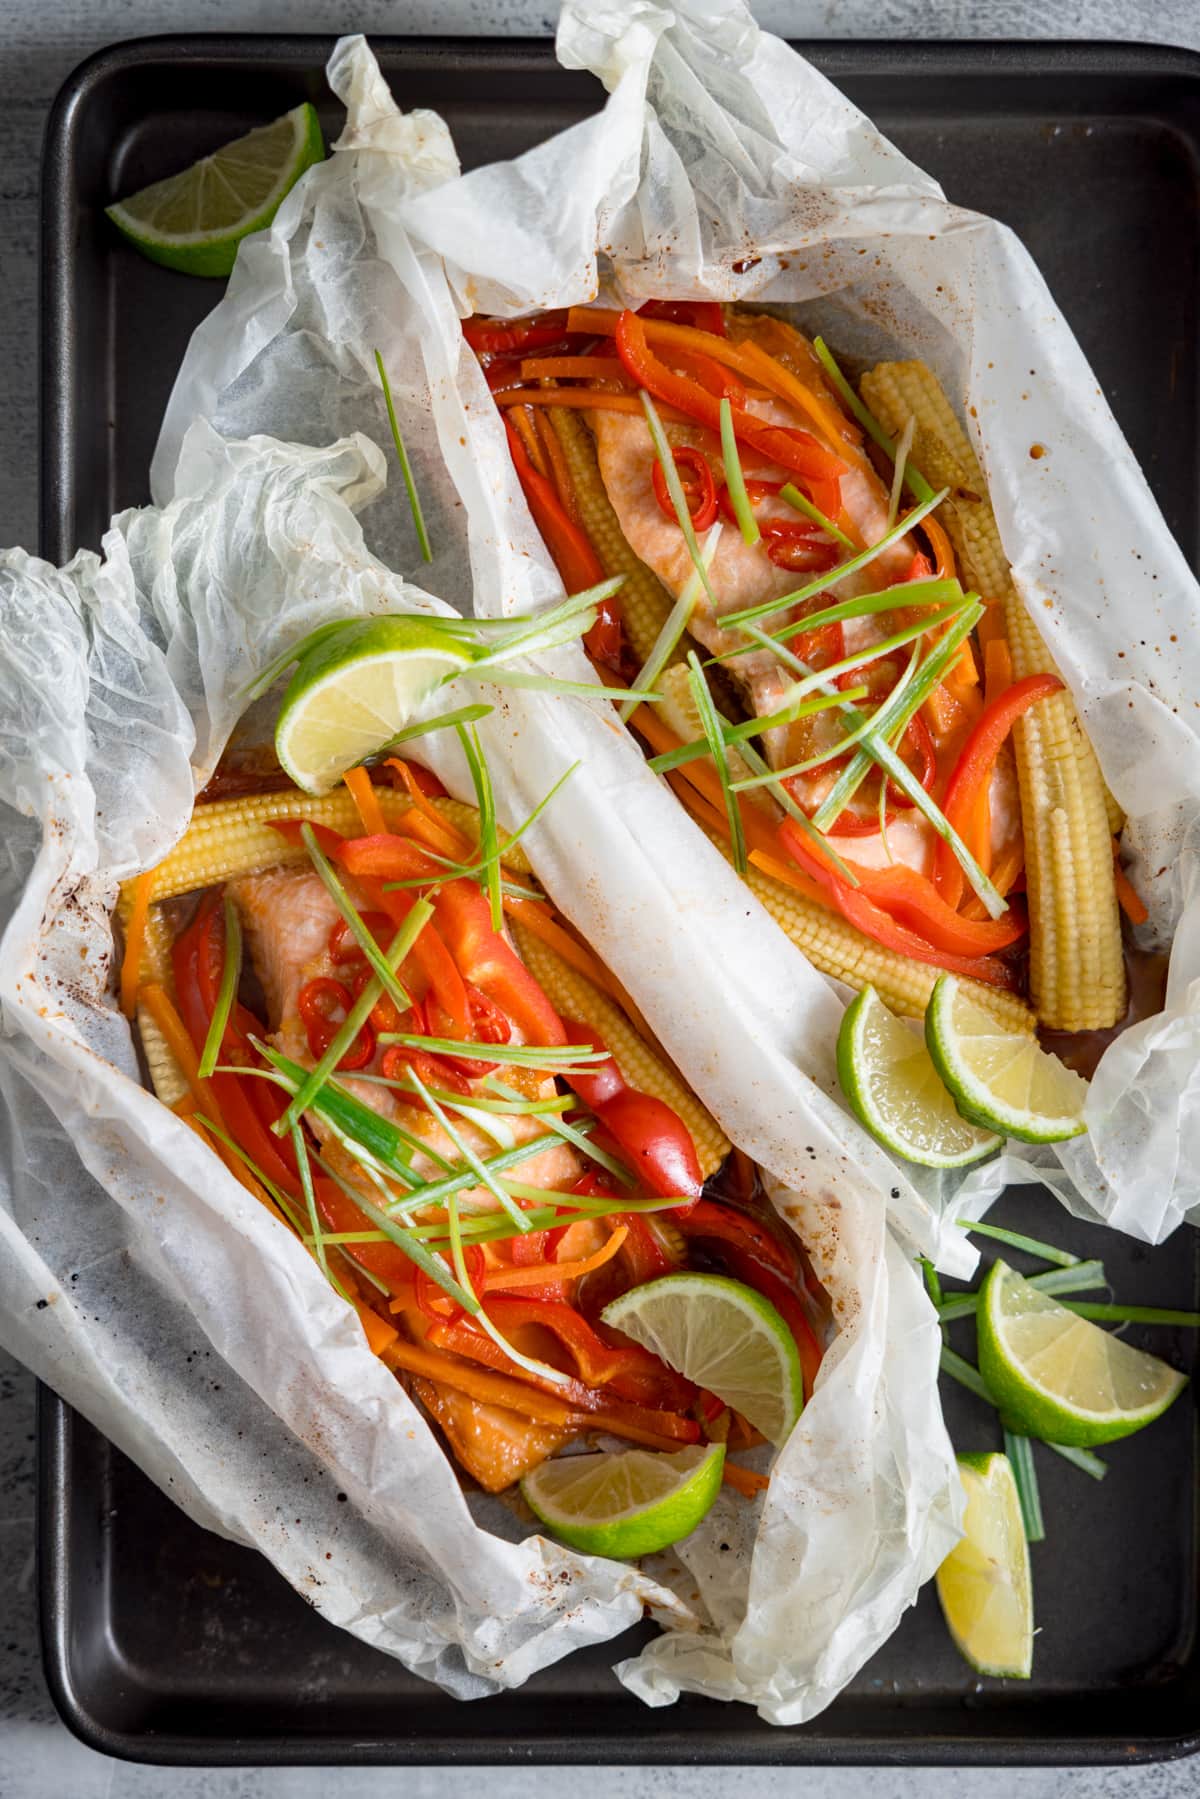 Two salmon fillets cooked in individual baking parchment parcels with slices of chilli, peppers, babycorn, carrot and spring onion. Also topped with wedges of lime. The parcels are open, on a dark baking tray. There are some lime wedges nearby.